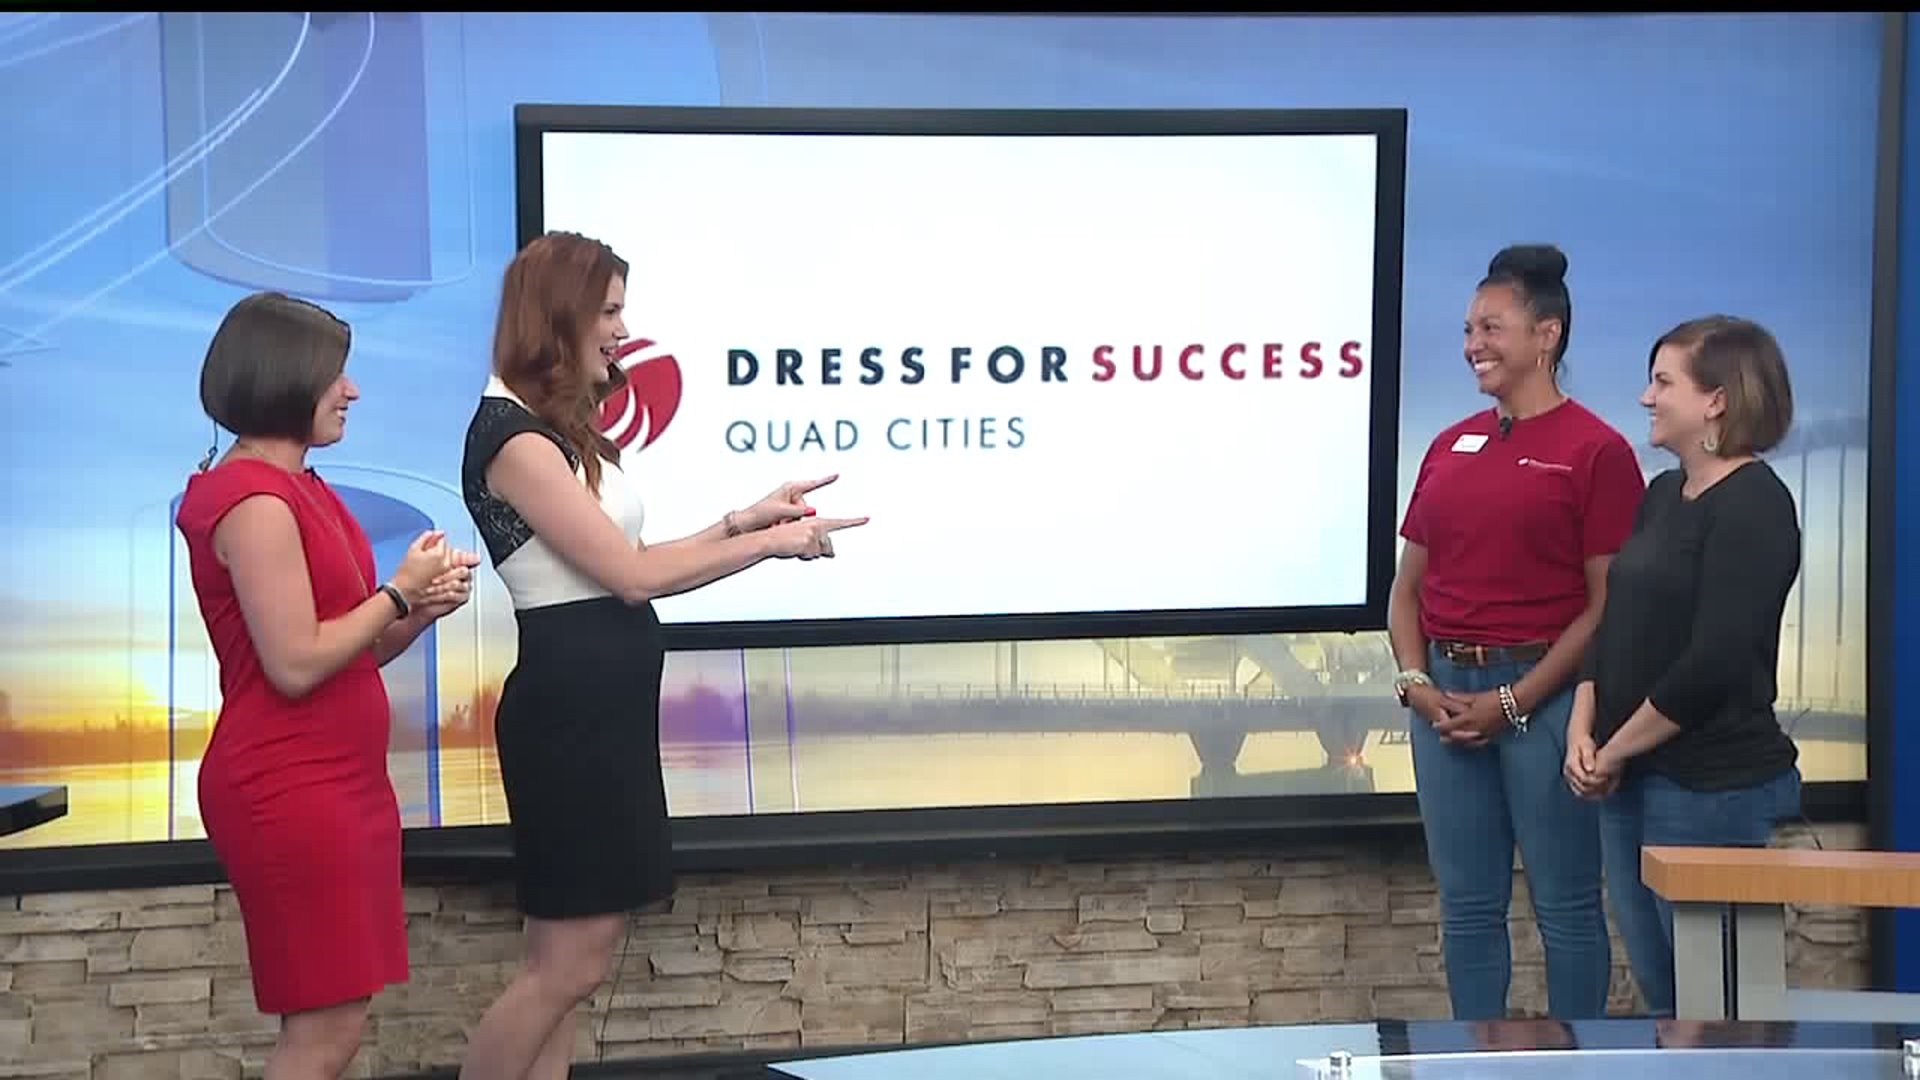 This is how much YOU helped raise for Dress for Success